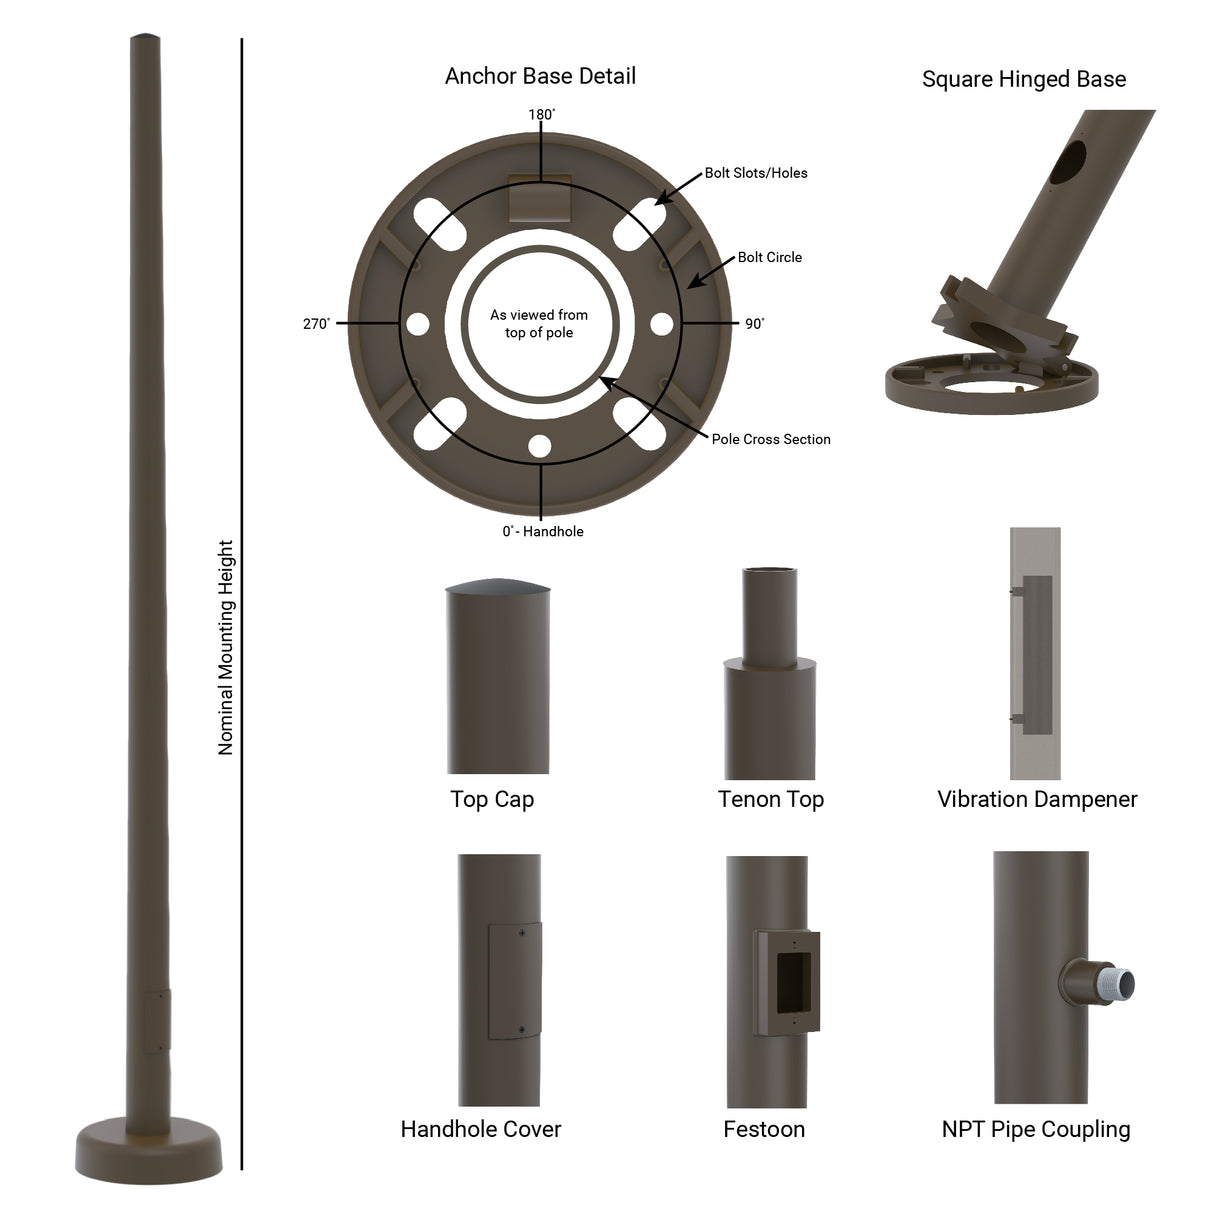 12' Tall x 4.0" Base OD x 3.0" Top OD x 0.125" Thick, Round Tapered Aluminum, Hinged Anchor Base Light Pole